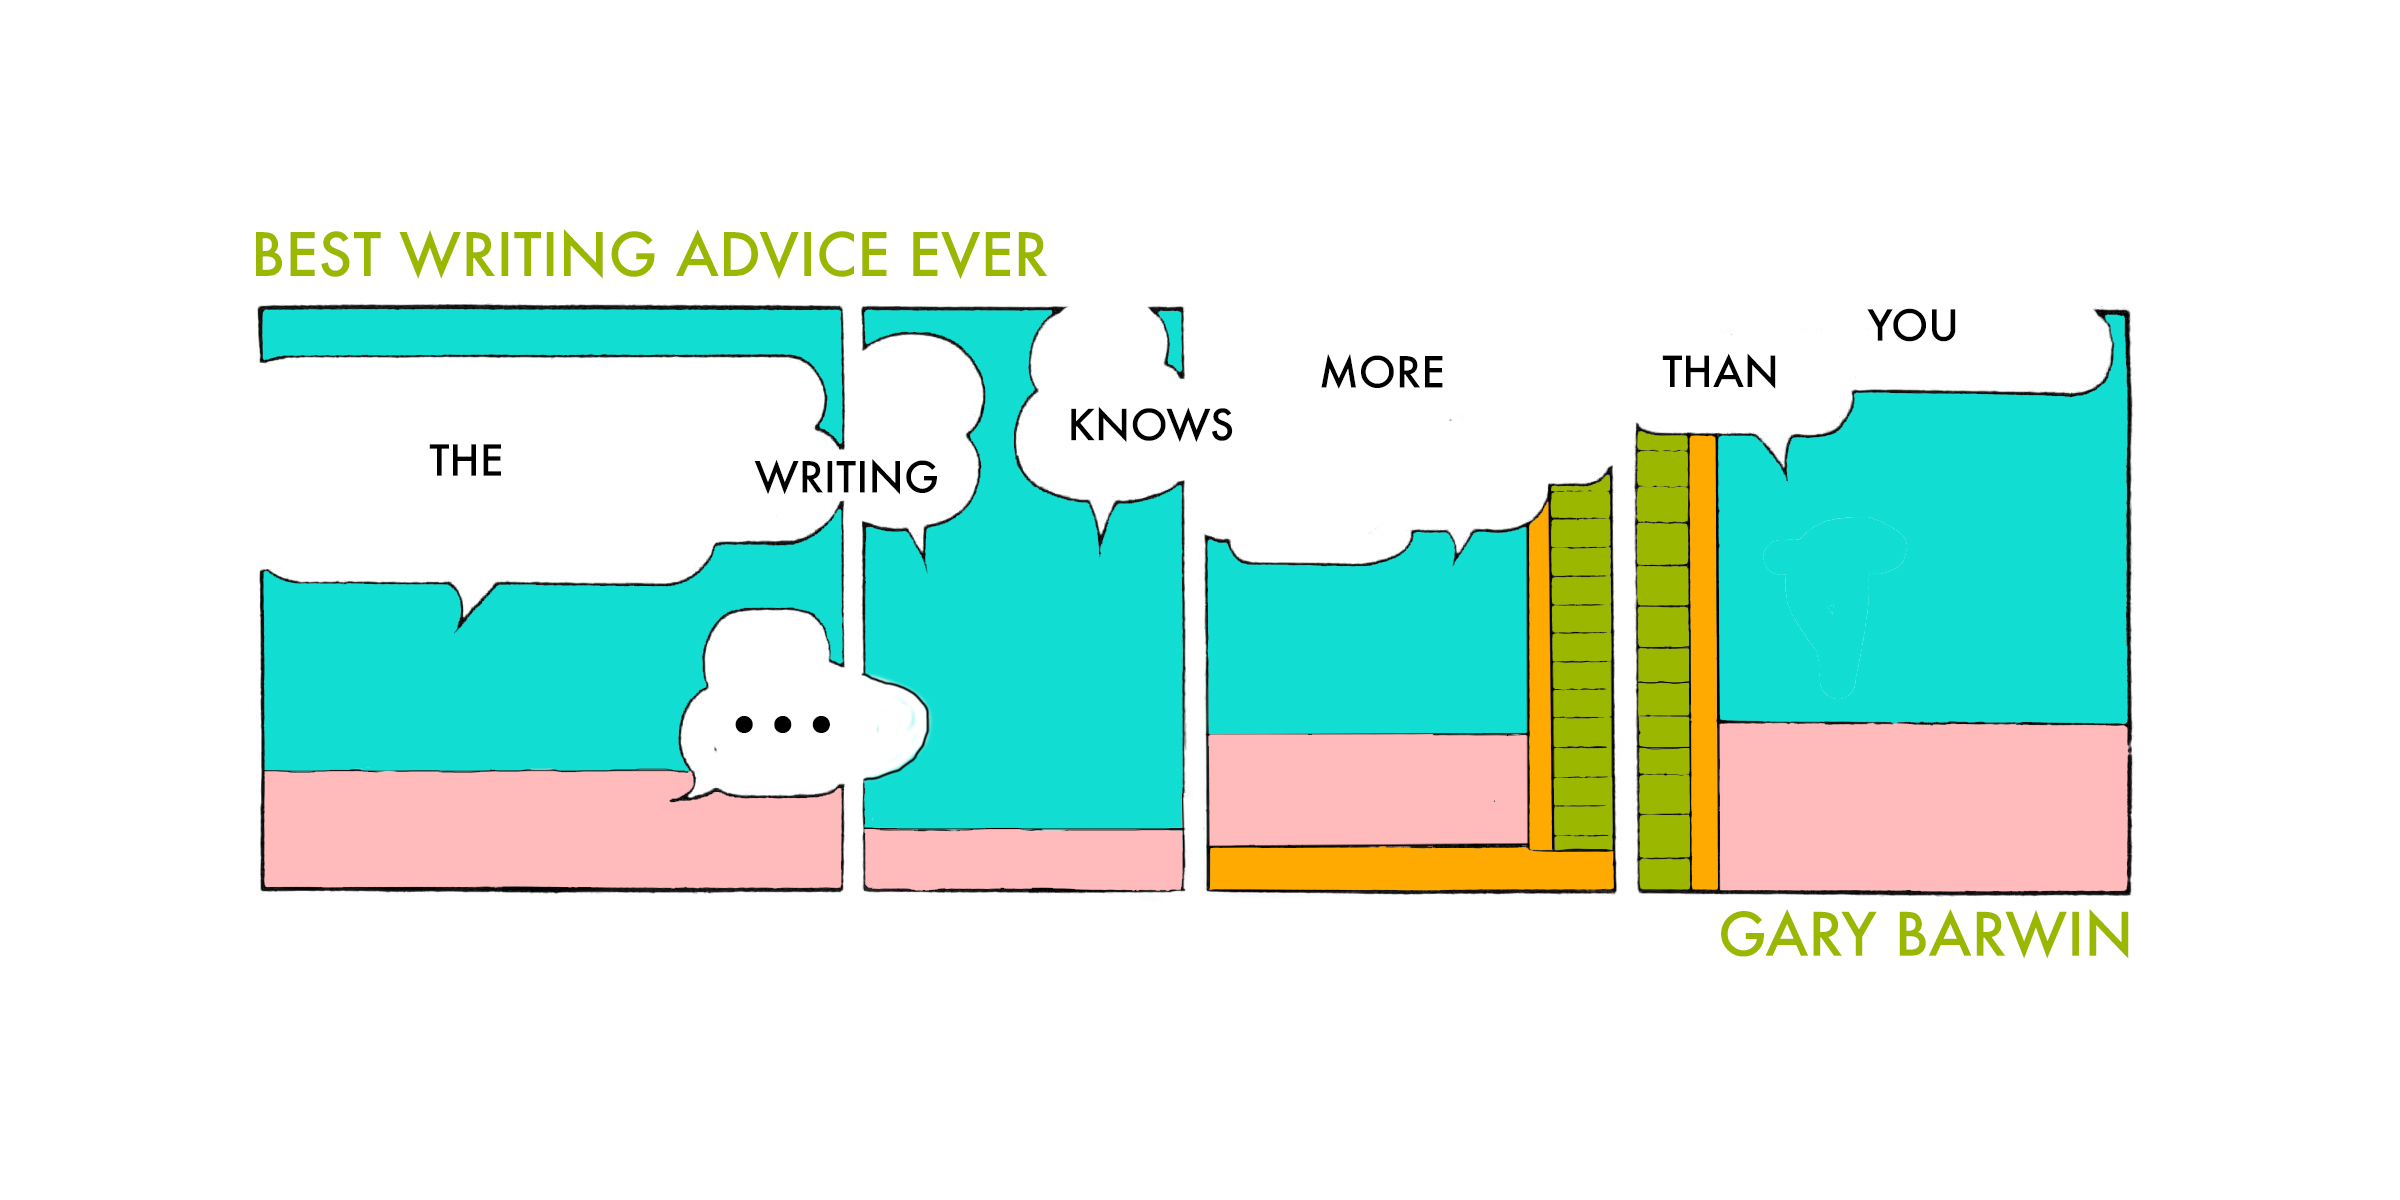 A comic strip style image titled "Best Writing Advice Ever". In speech bubbles that break through each cell of the comic, the words "The writing knows more than you" can be read.